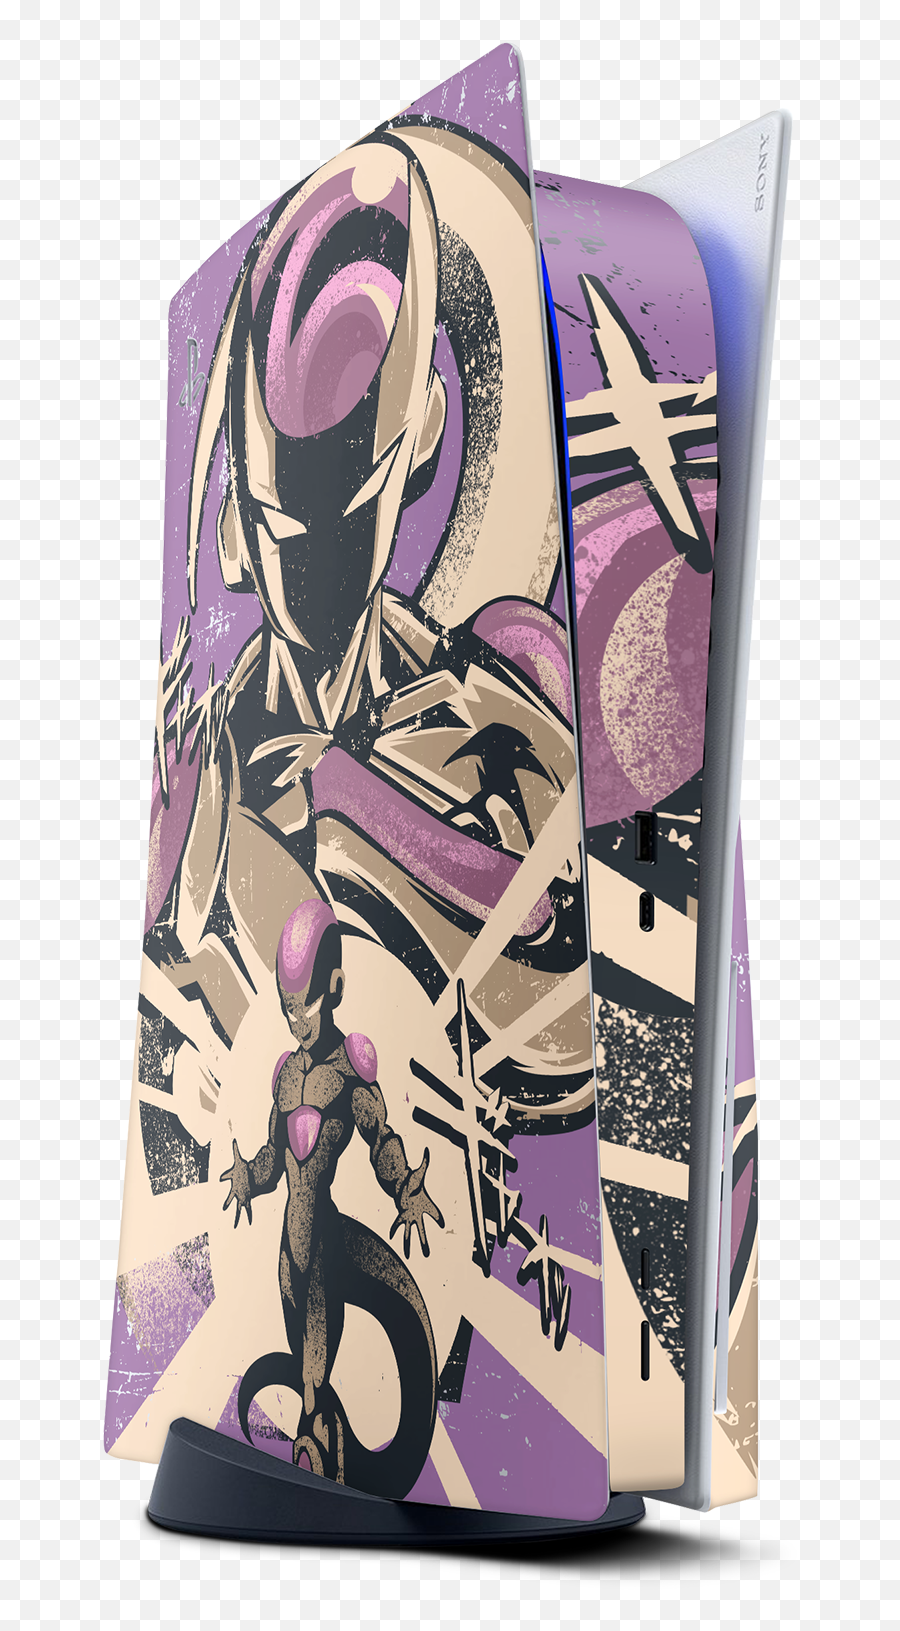 Ps5 Console Skins - Vgf Gamers Transformers Png,Frieza Icon